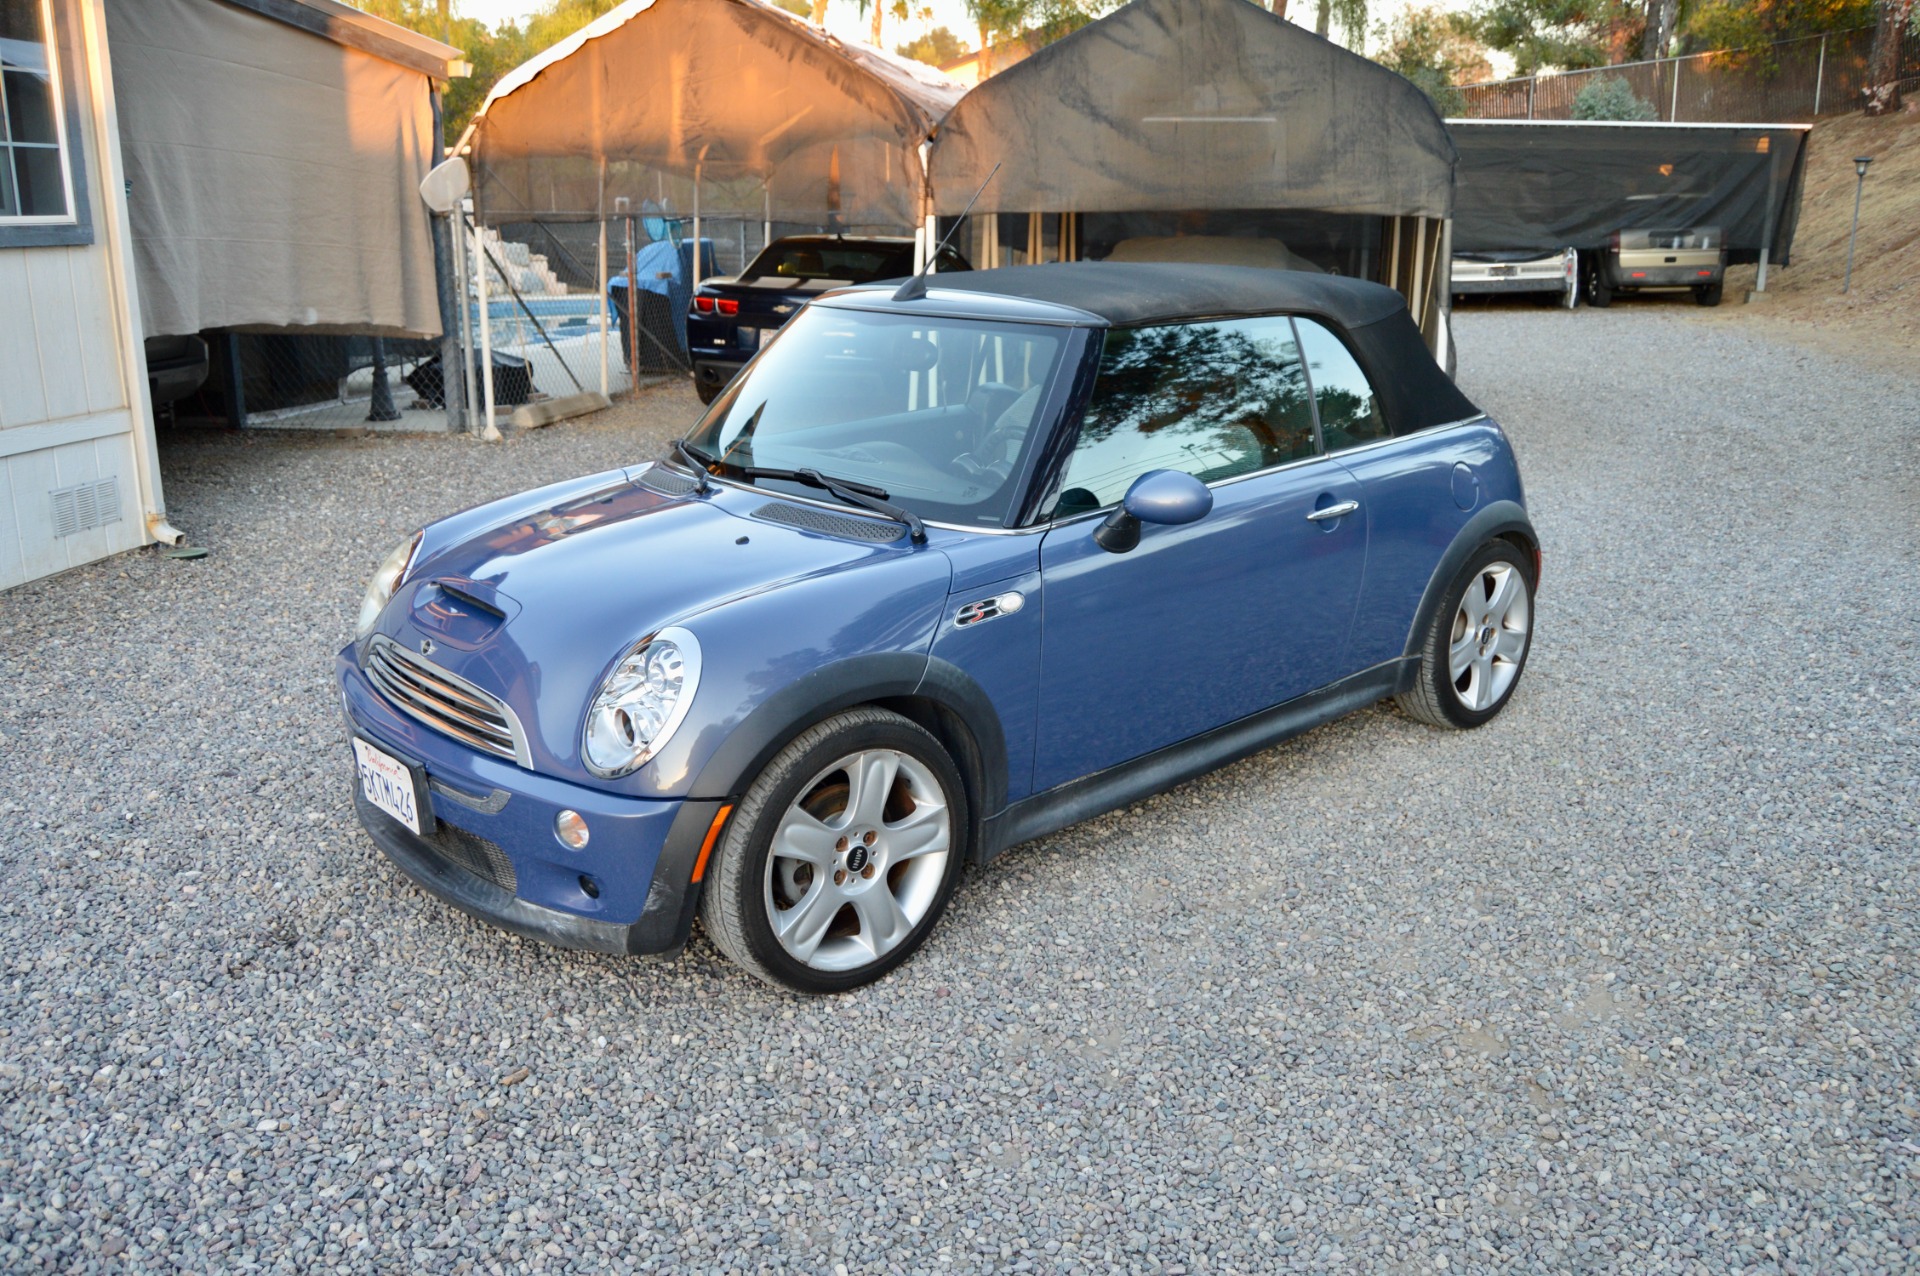 Used 2005 MINI Cooper S For Sale ($1,950) | Affordable Classics San Diego  Stock #252